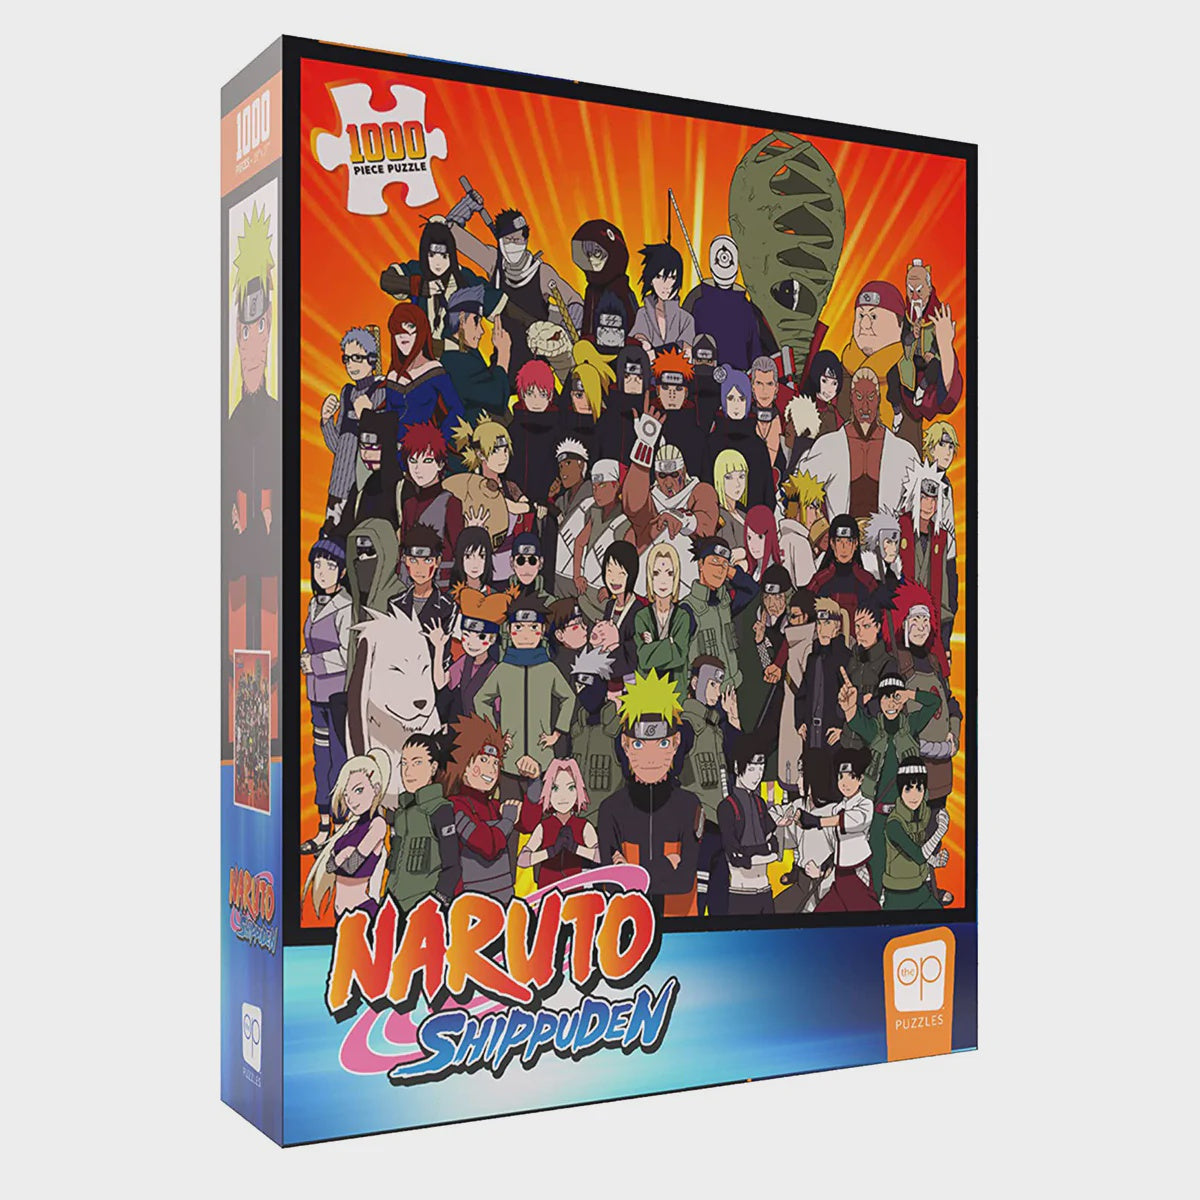 Puzzle: Naruto Never Forget Your Friends 1000 Piece Jigsaw